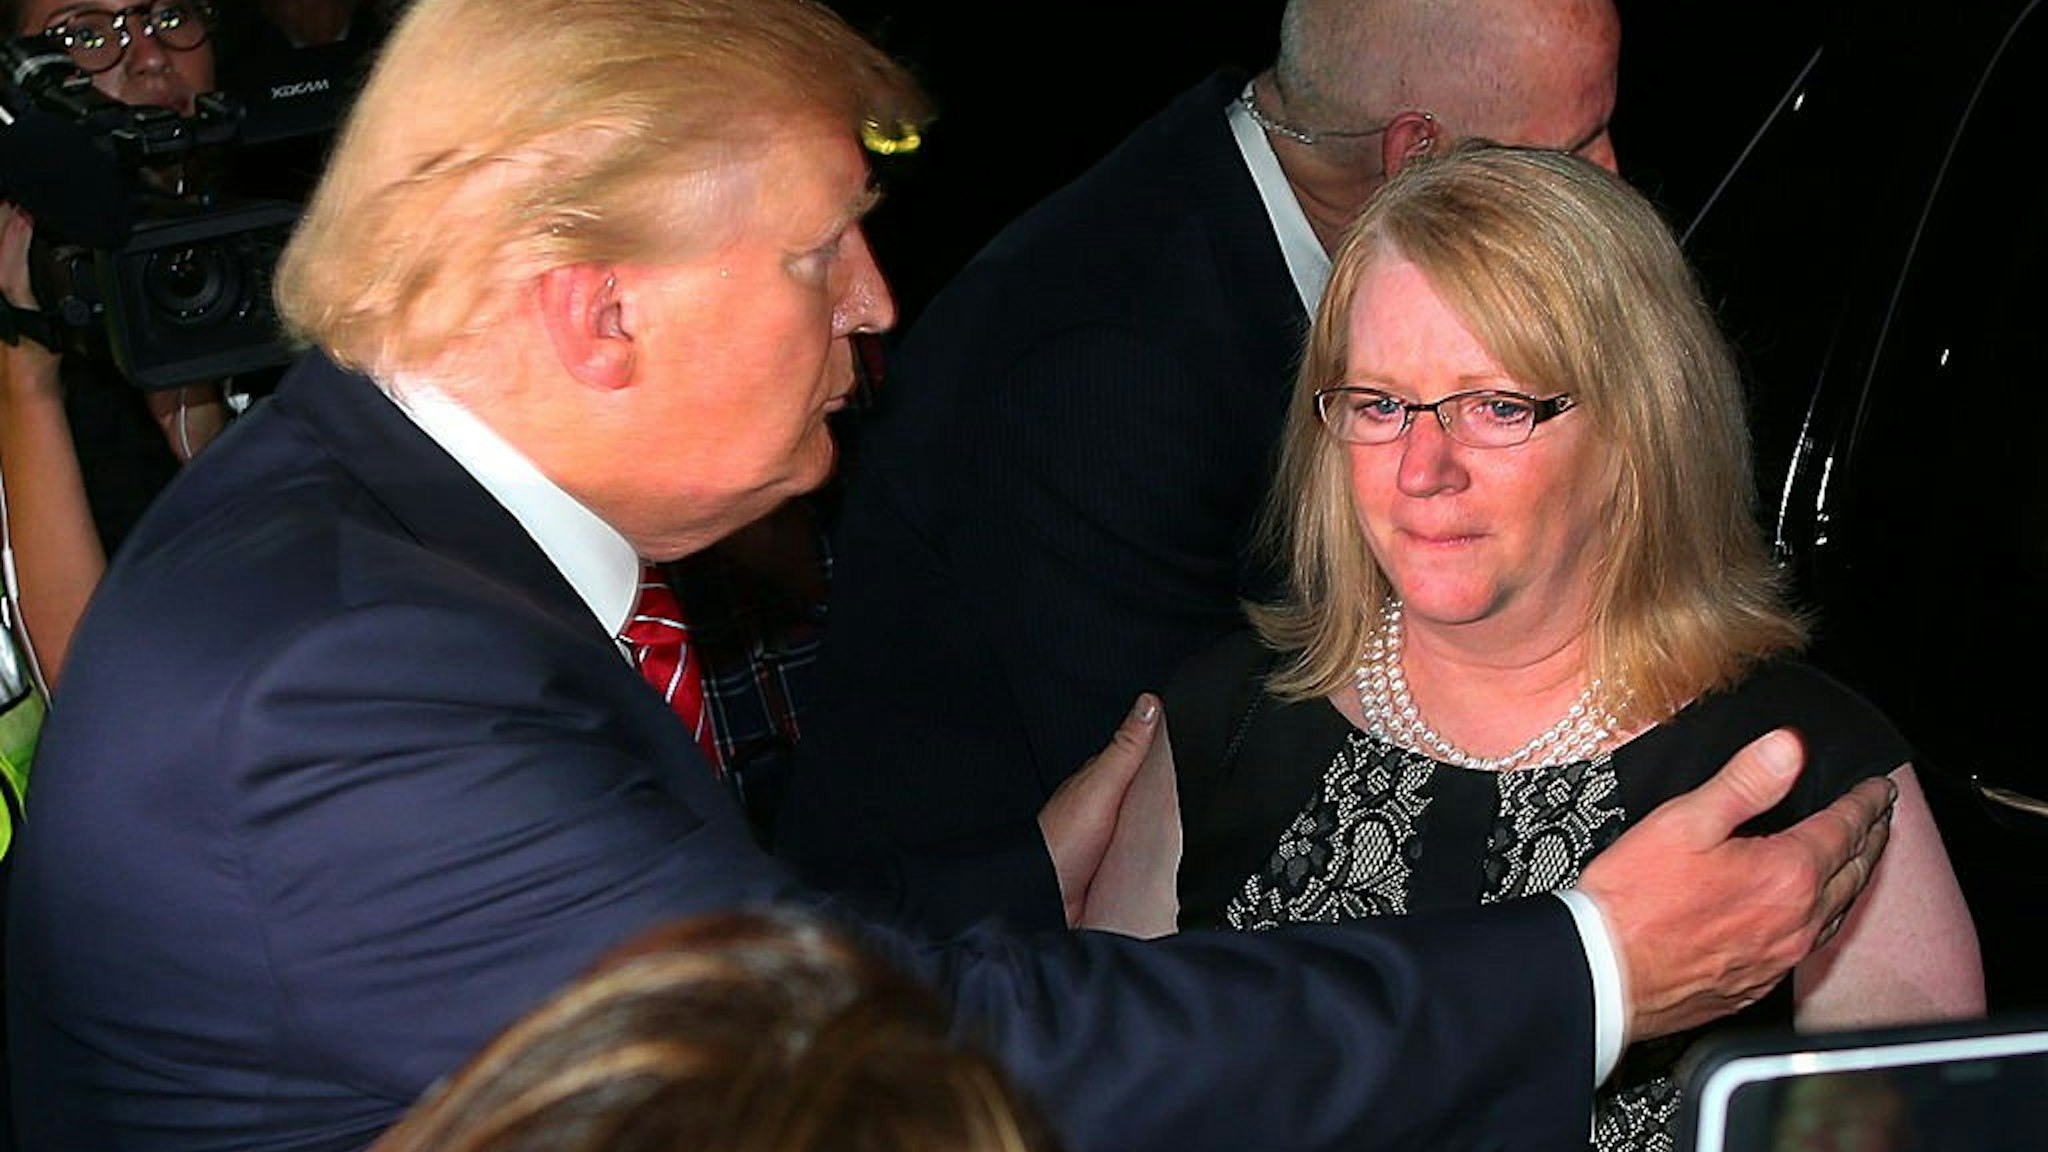 NORWOOD, MA - AUGUST 28: A fundraiser was held at the mansion of car dealer Ernie Boch Jr. for Republican presidential hopeful Donald Trump. As he leaves, Trump hugs a crying Maureen Maloney who's son, Matthew Denice from Milford was killed in 2011 in a m